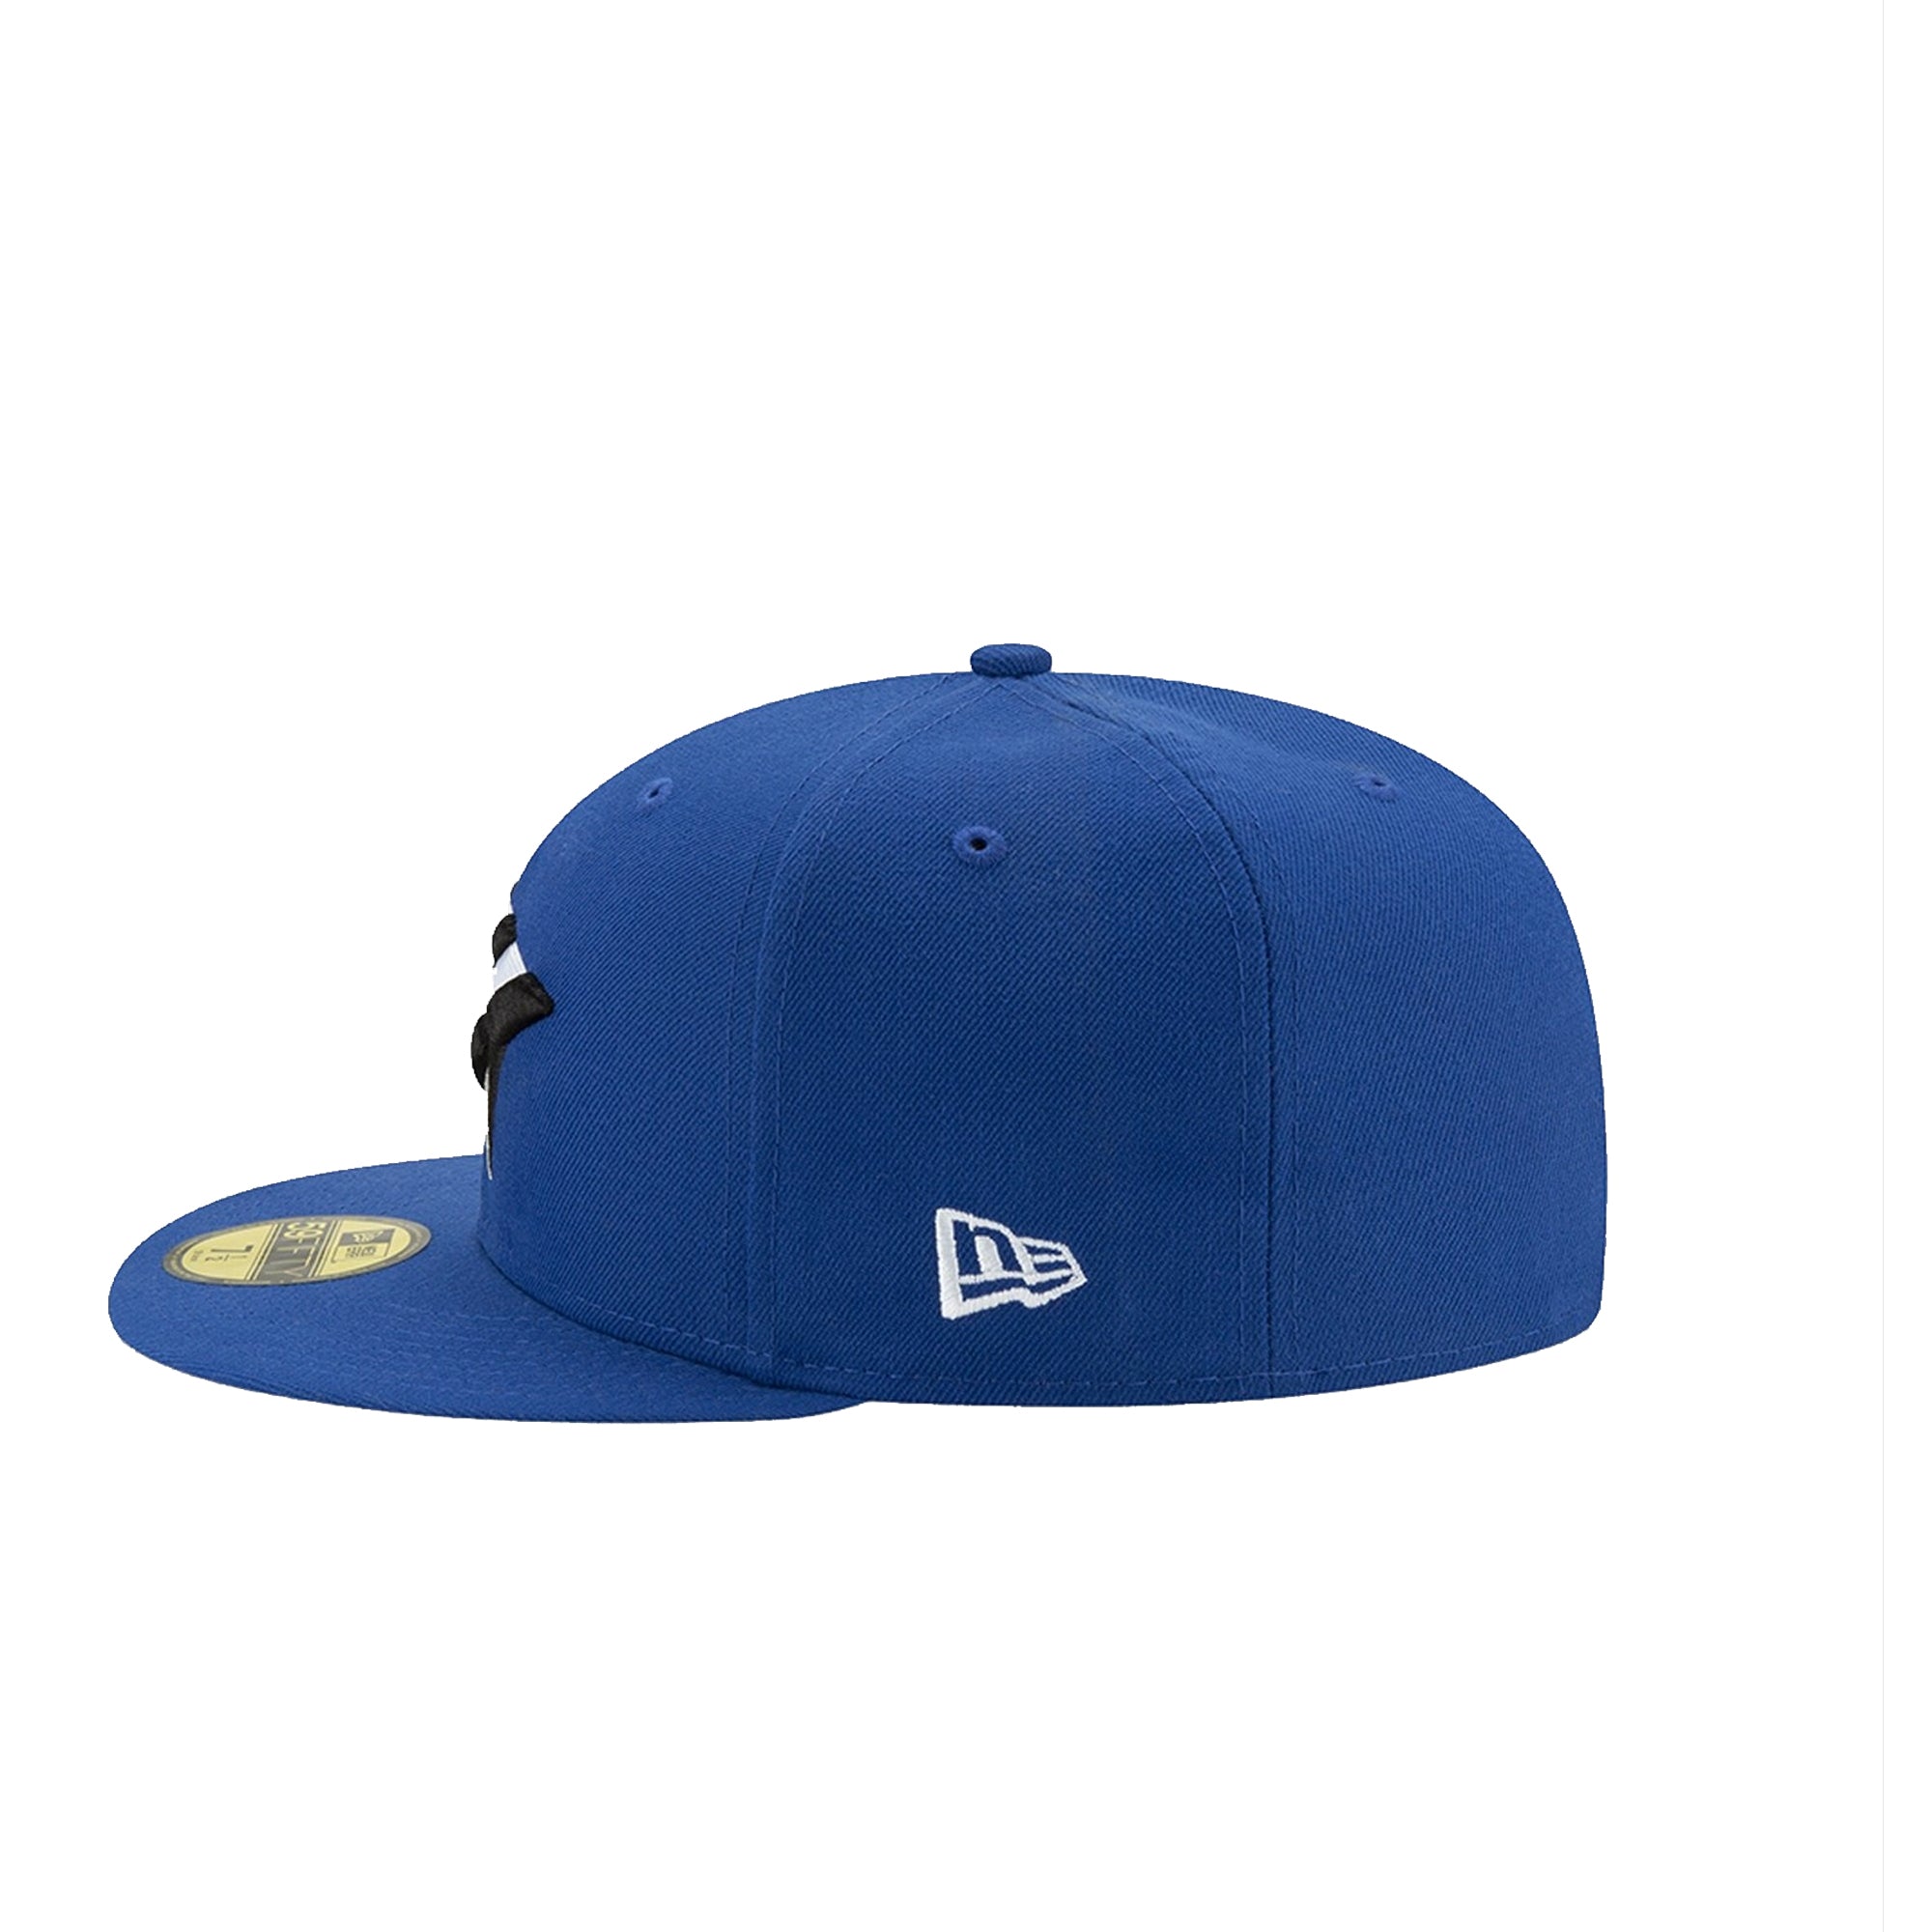 Paper Planes Mens Royal Crown Fitted